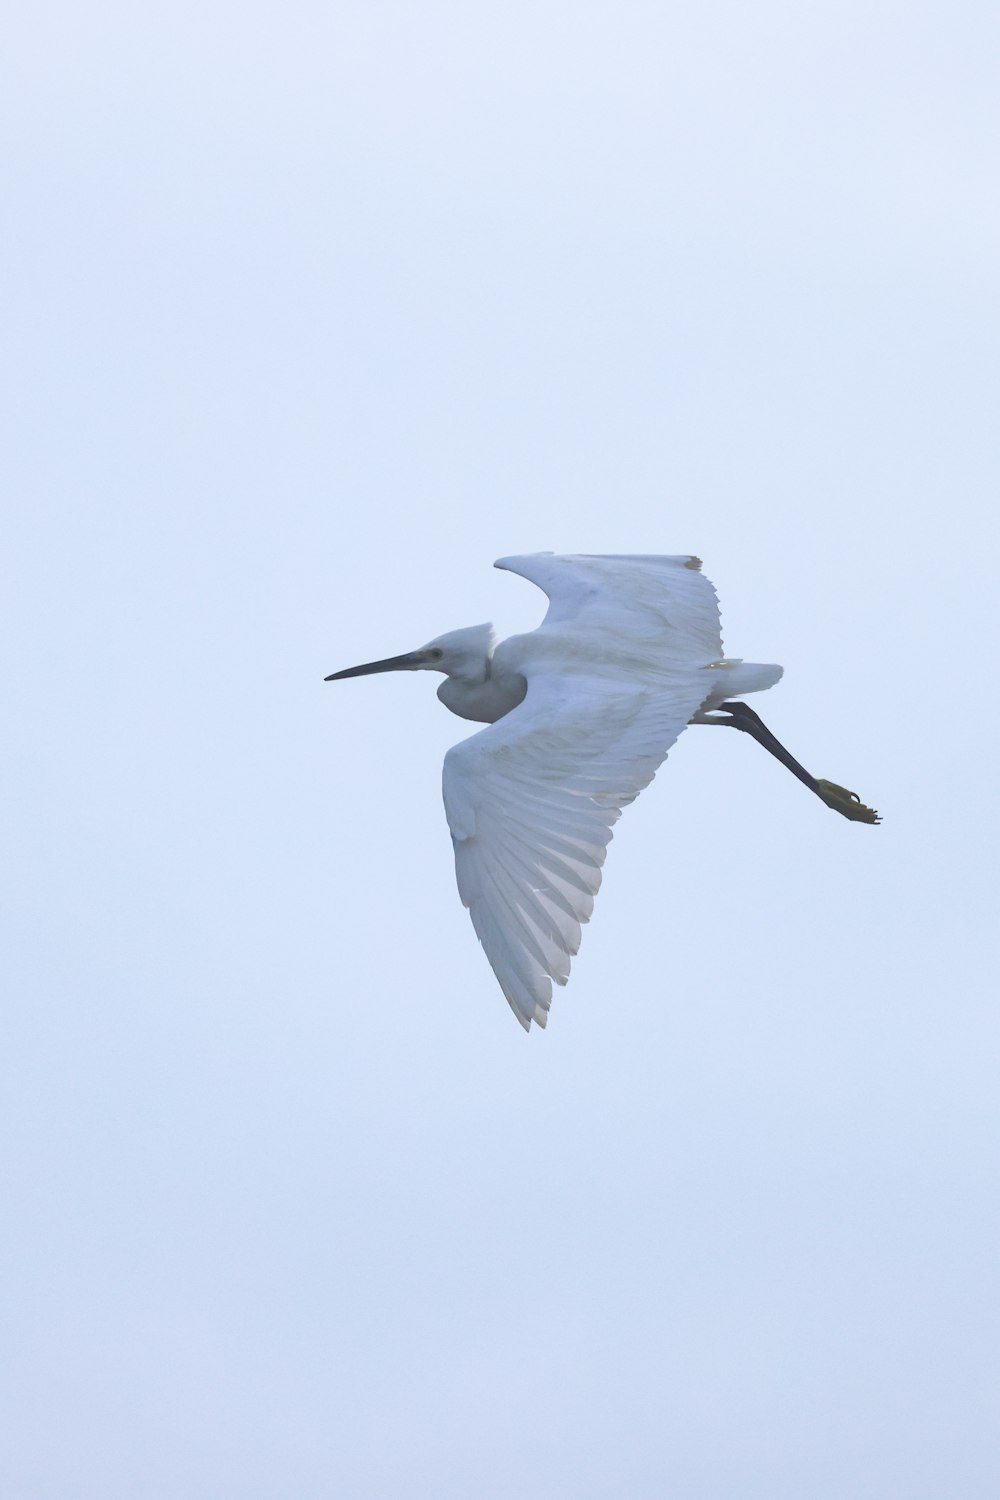 a large white bird flying through a blue sky